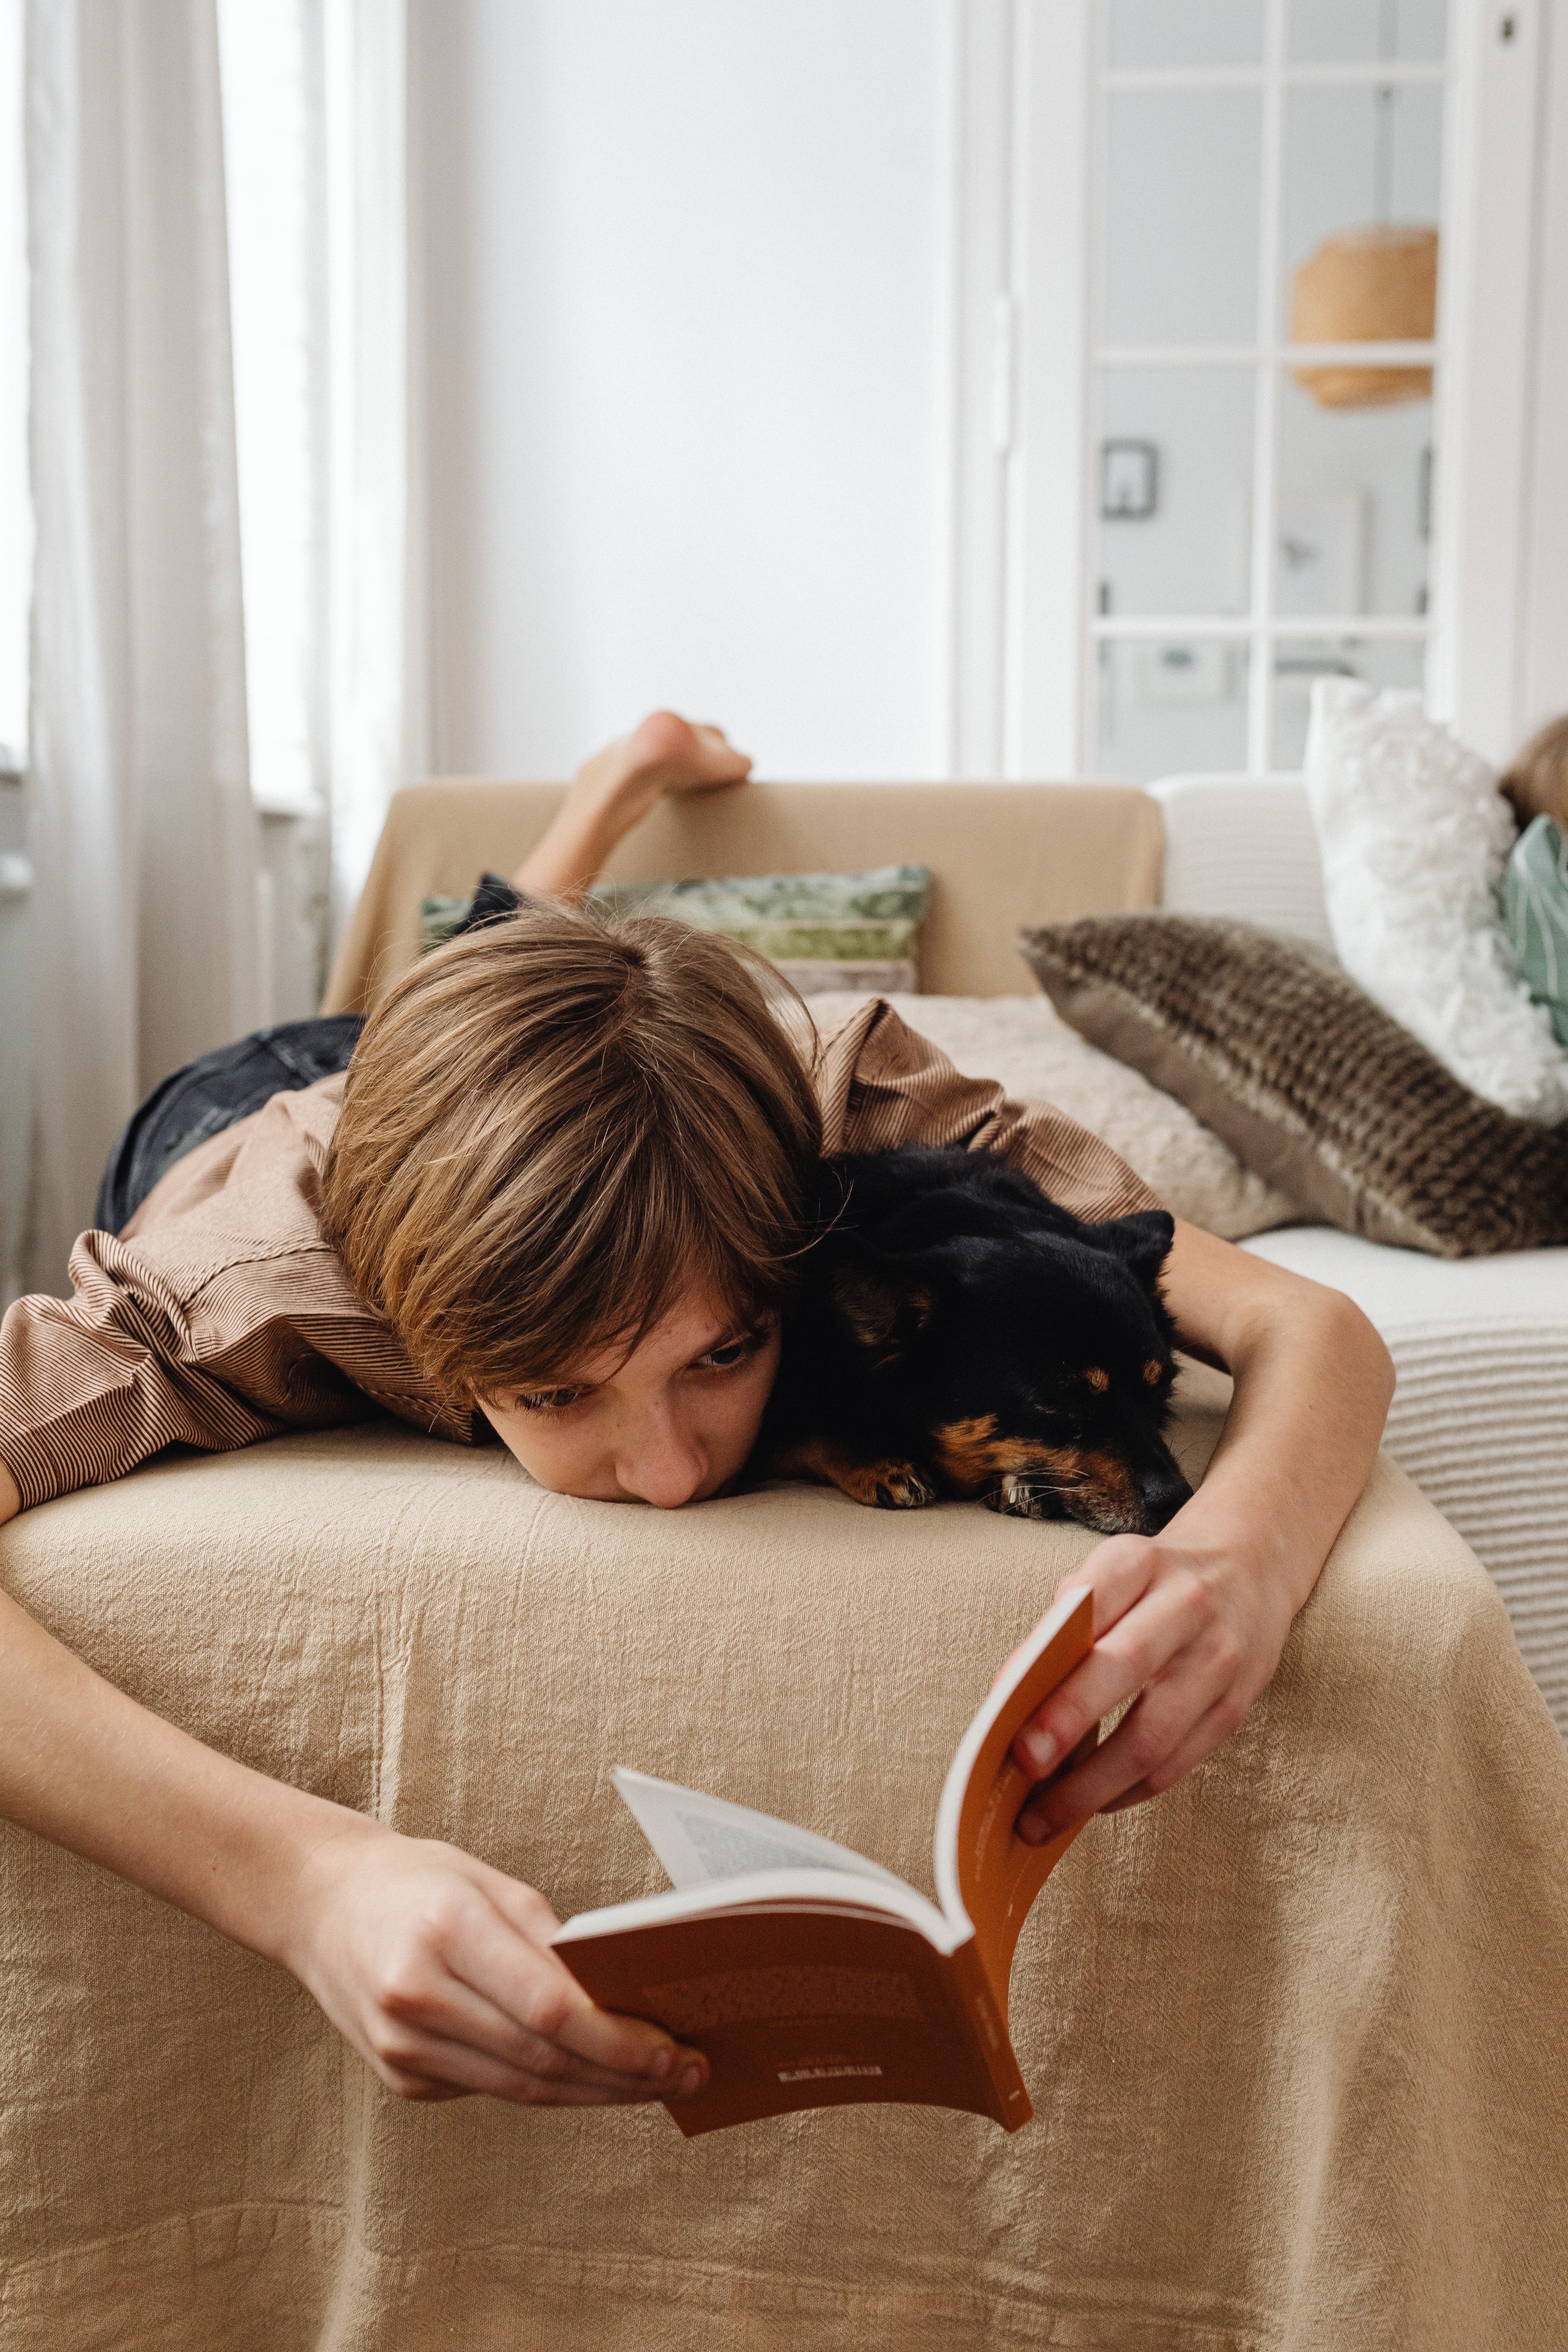 A little boy reading a book with his dog while lying on his bed | Source: Pexels